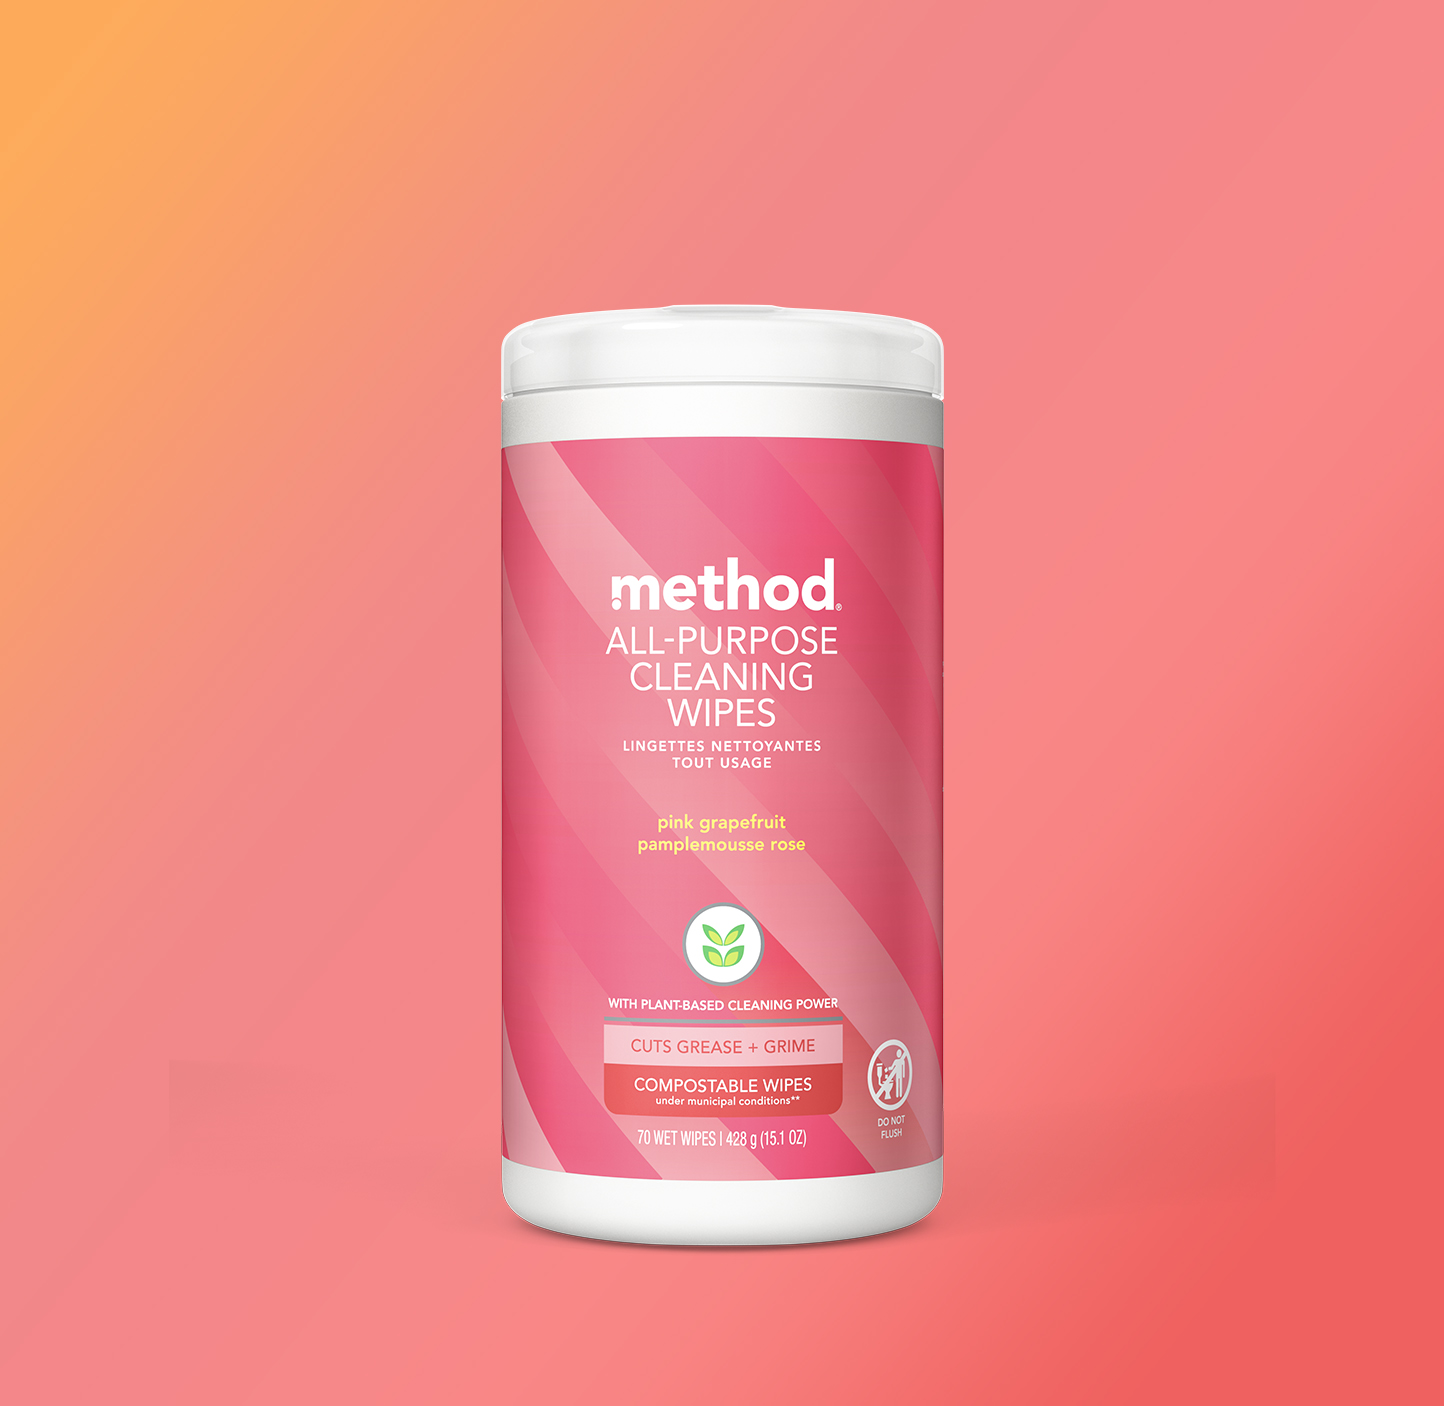 Method Cleaning Wipes, All-Purpose, Pink Grapefruit - 70 wipes, 15.1 oz